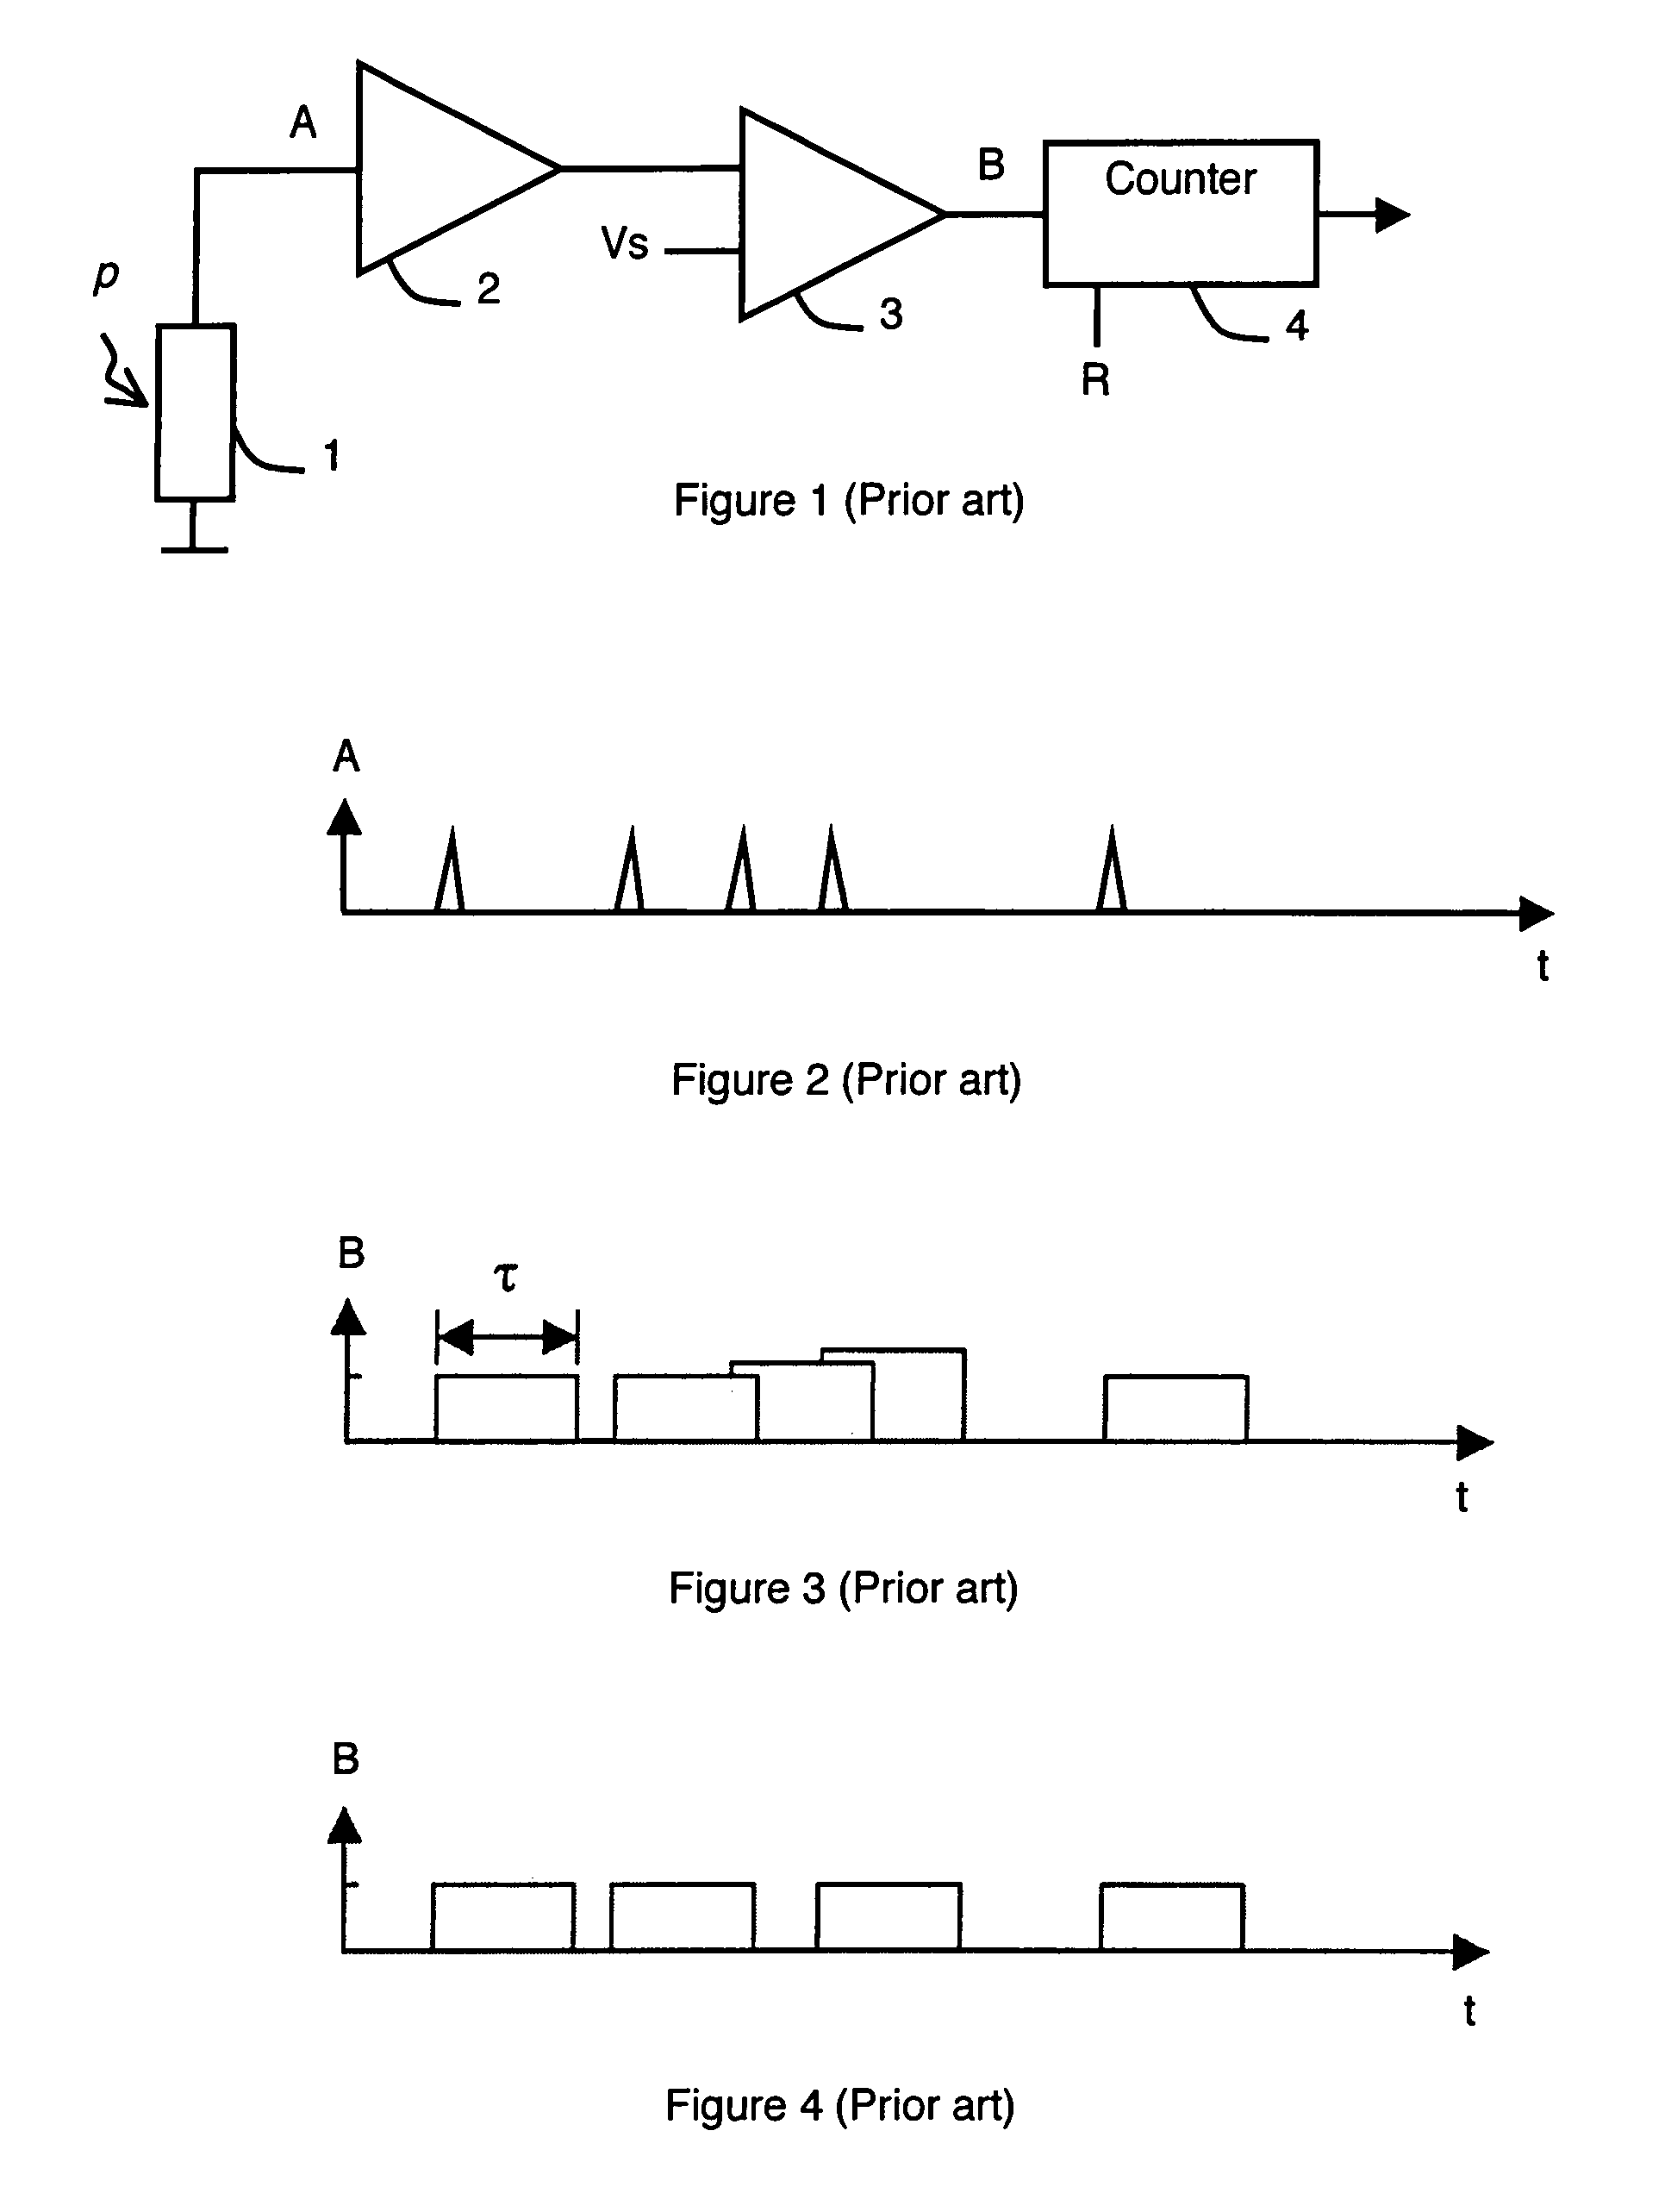 Particle detection circuit comprising basic circuits forming subpixels